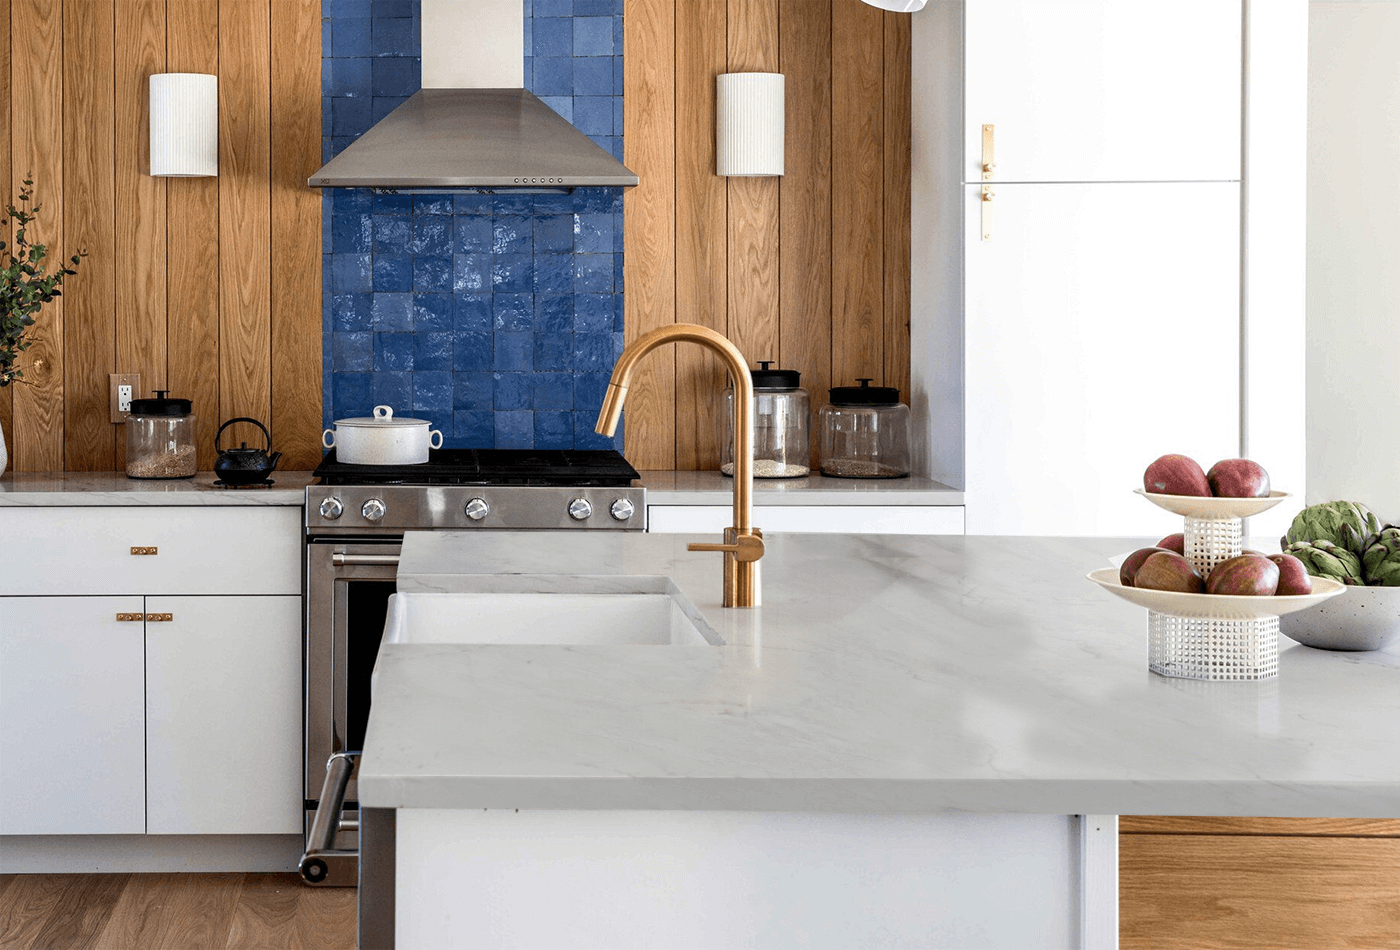 Try out these applications on White Marble Worktop